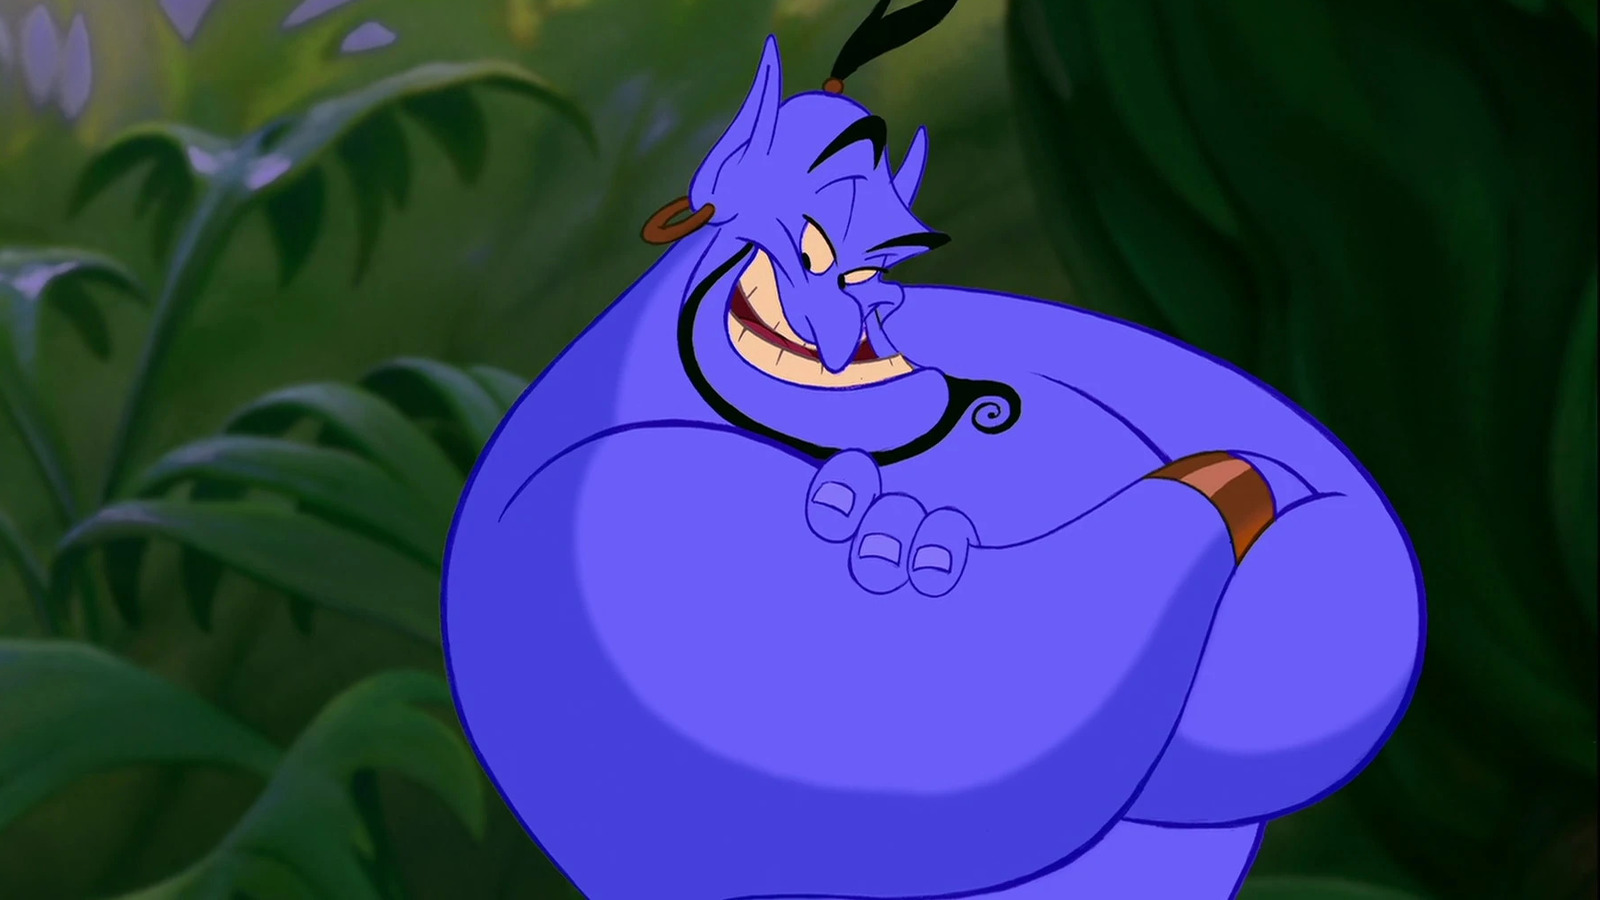 Robin Williams' Aladdin Casting Called For A Complete Reimagining Of The  Genie Role